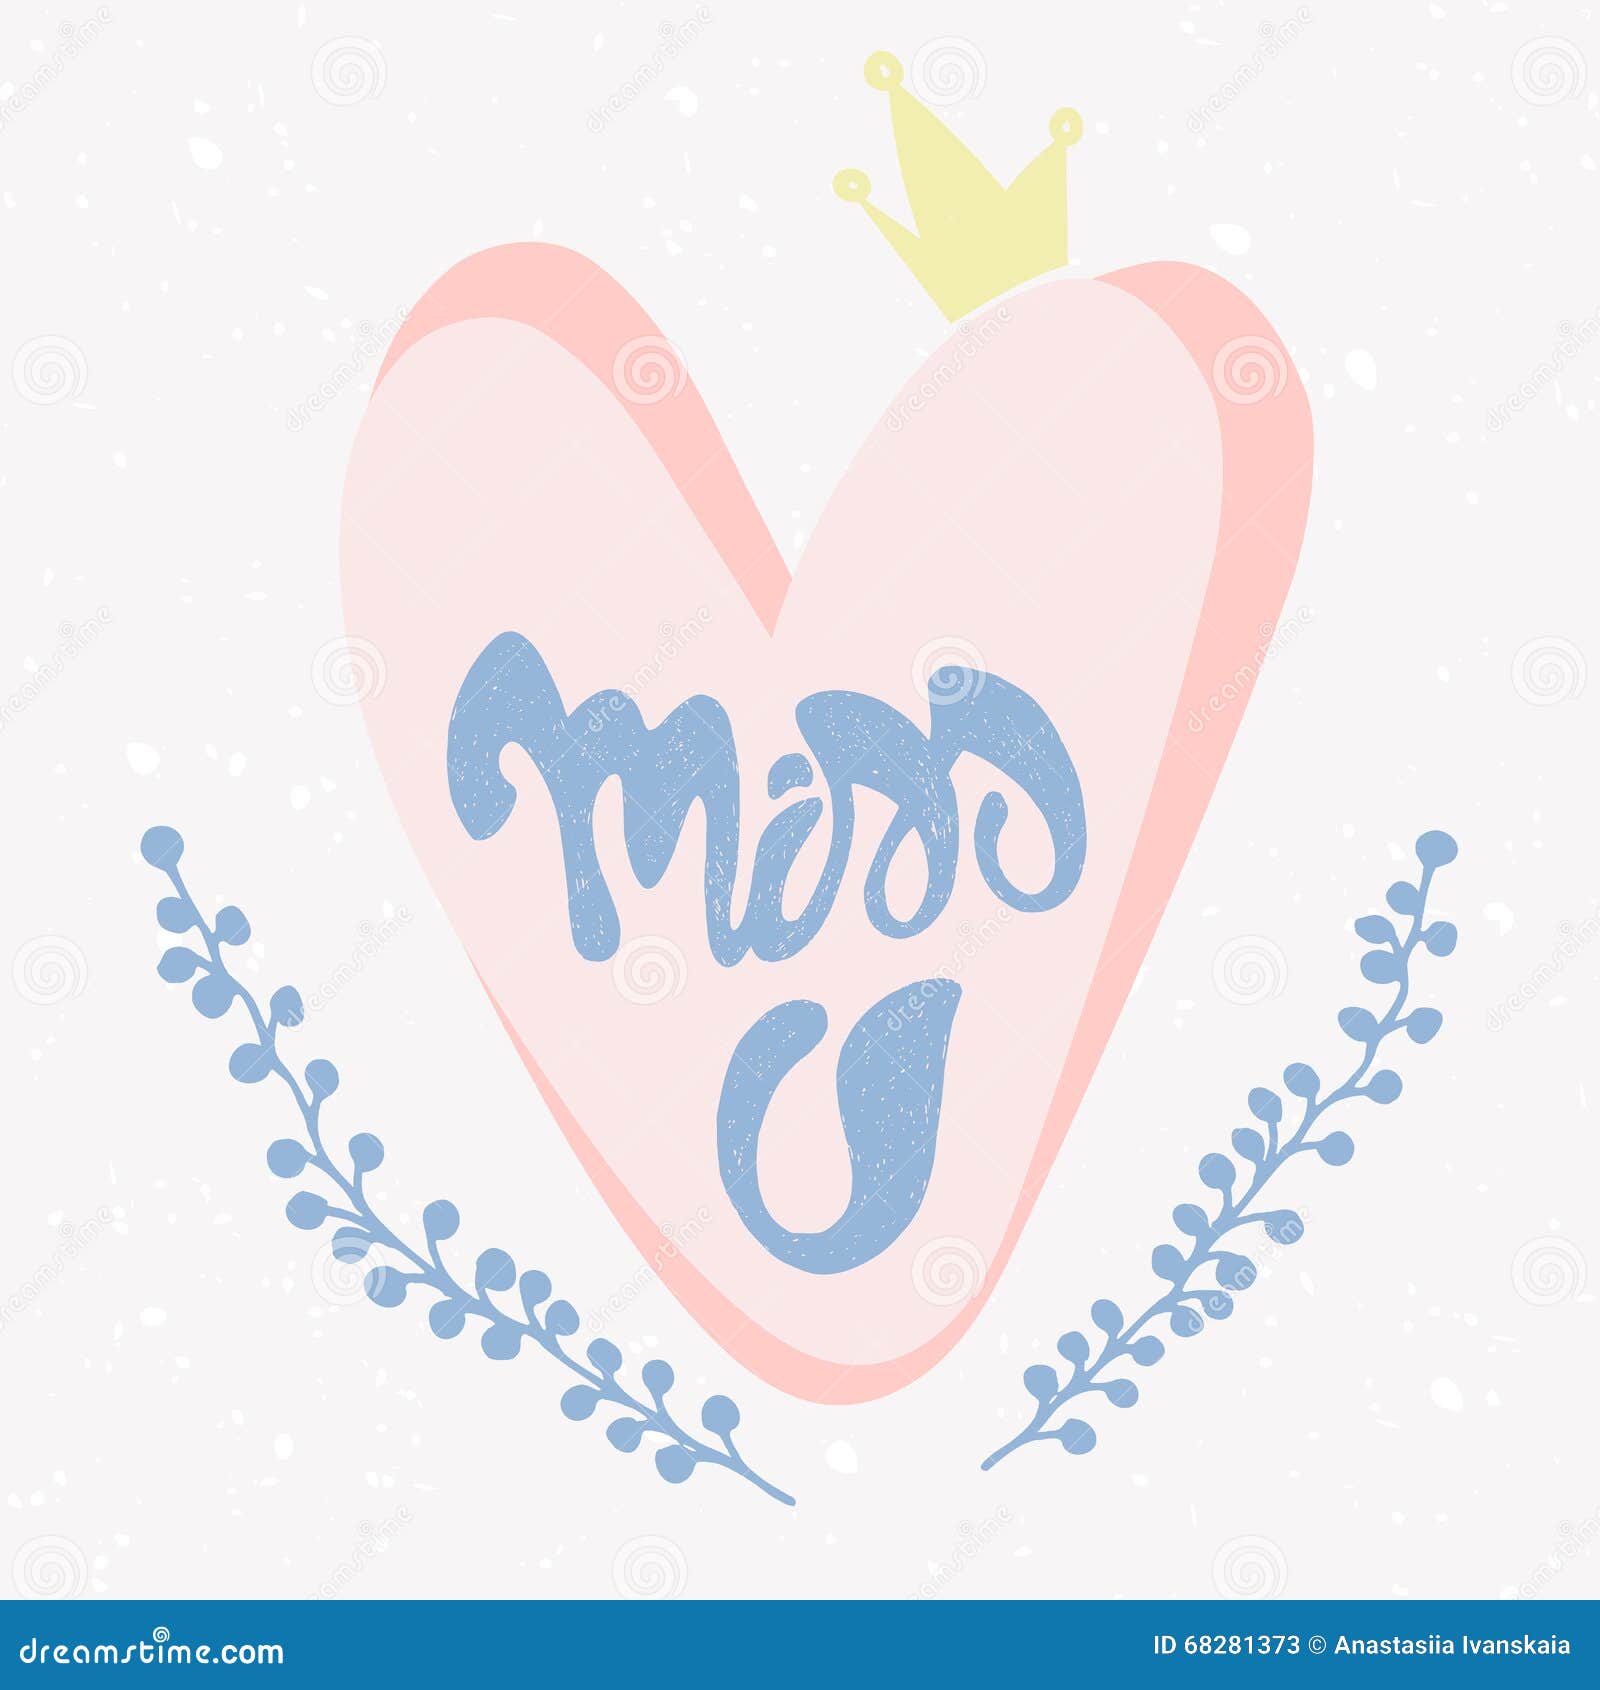 Romantic Miss You card. stock vector. Illustration of label - 68281373